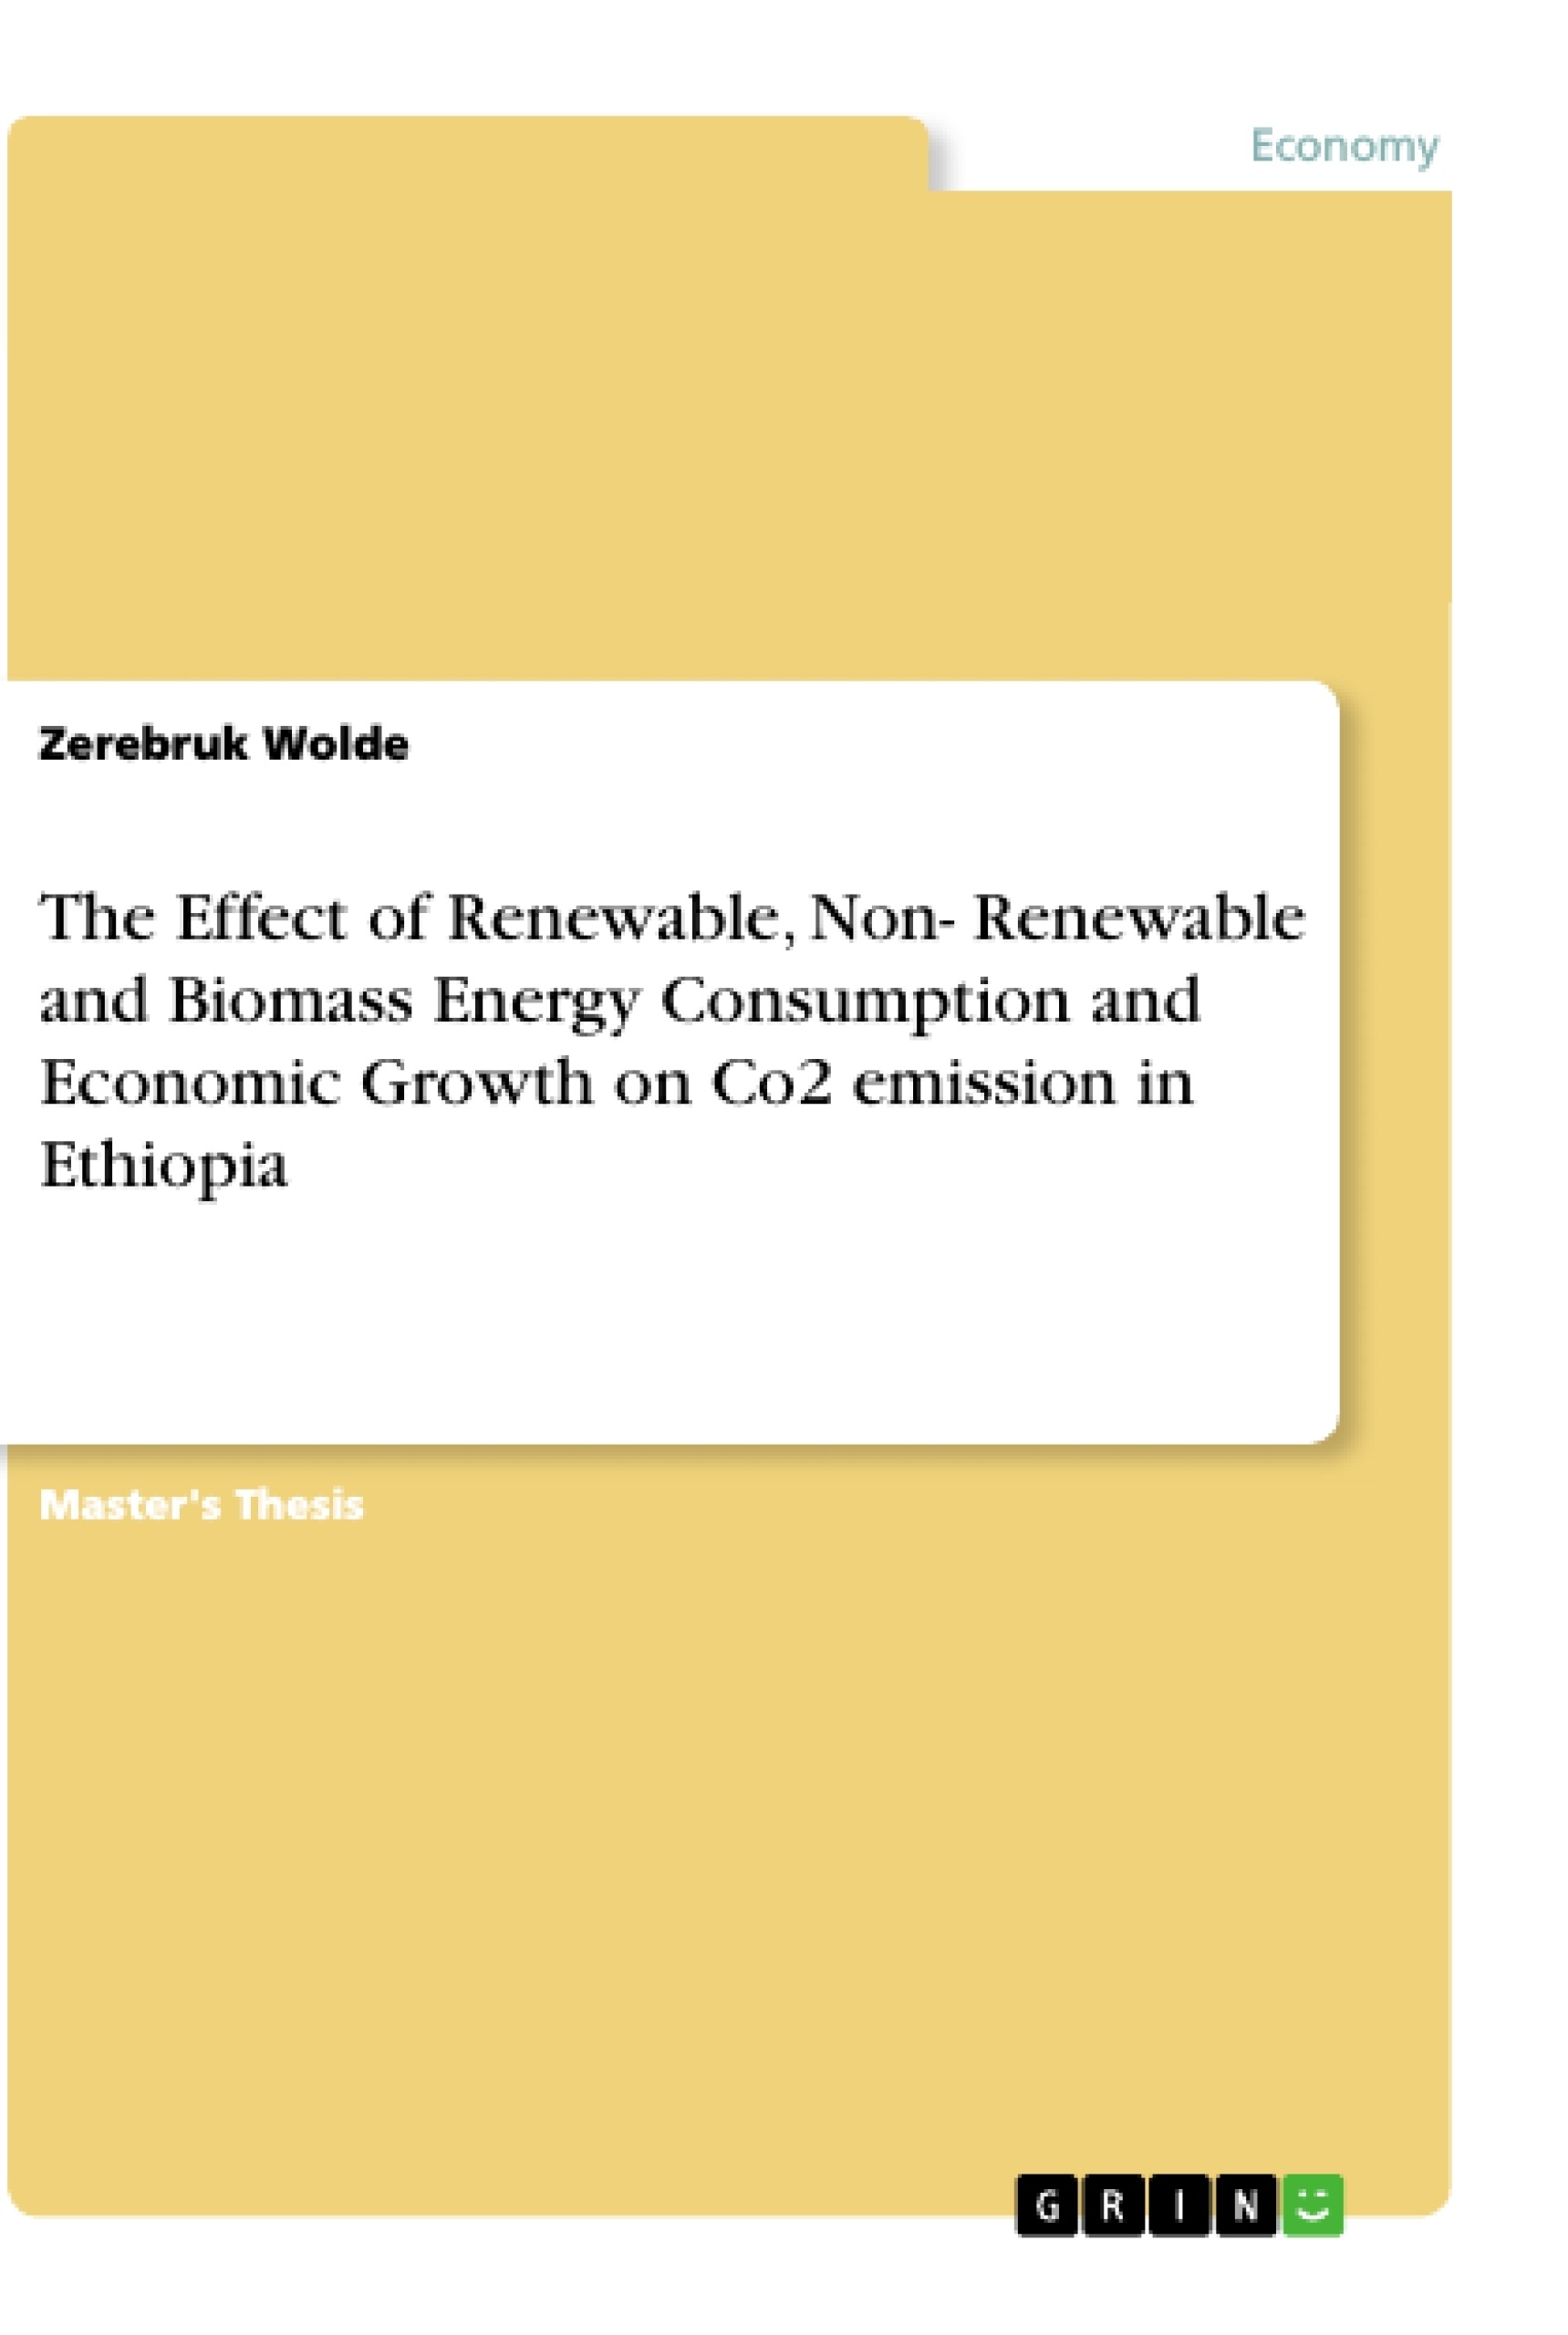 Title: The Effect of Renewable, Non- Renewable and Biomass Energy Consumption and Economic Growth on Co2 emission in Ethiopia